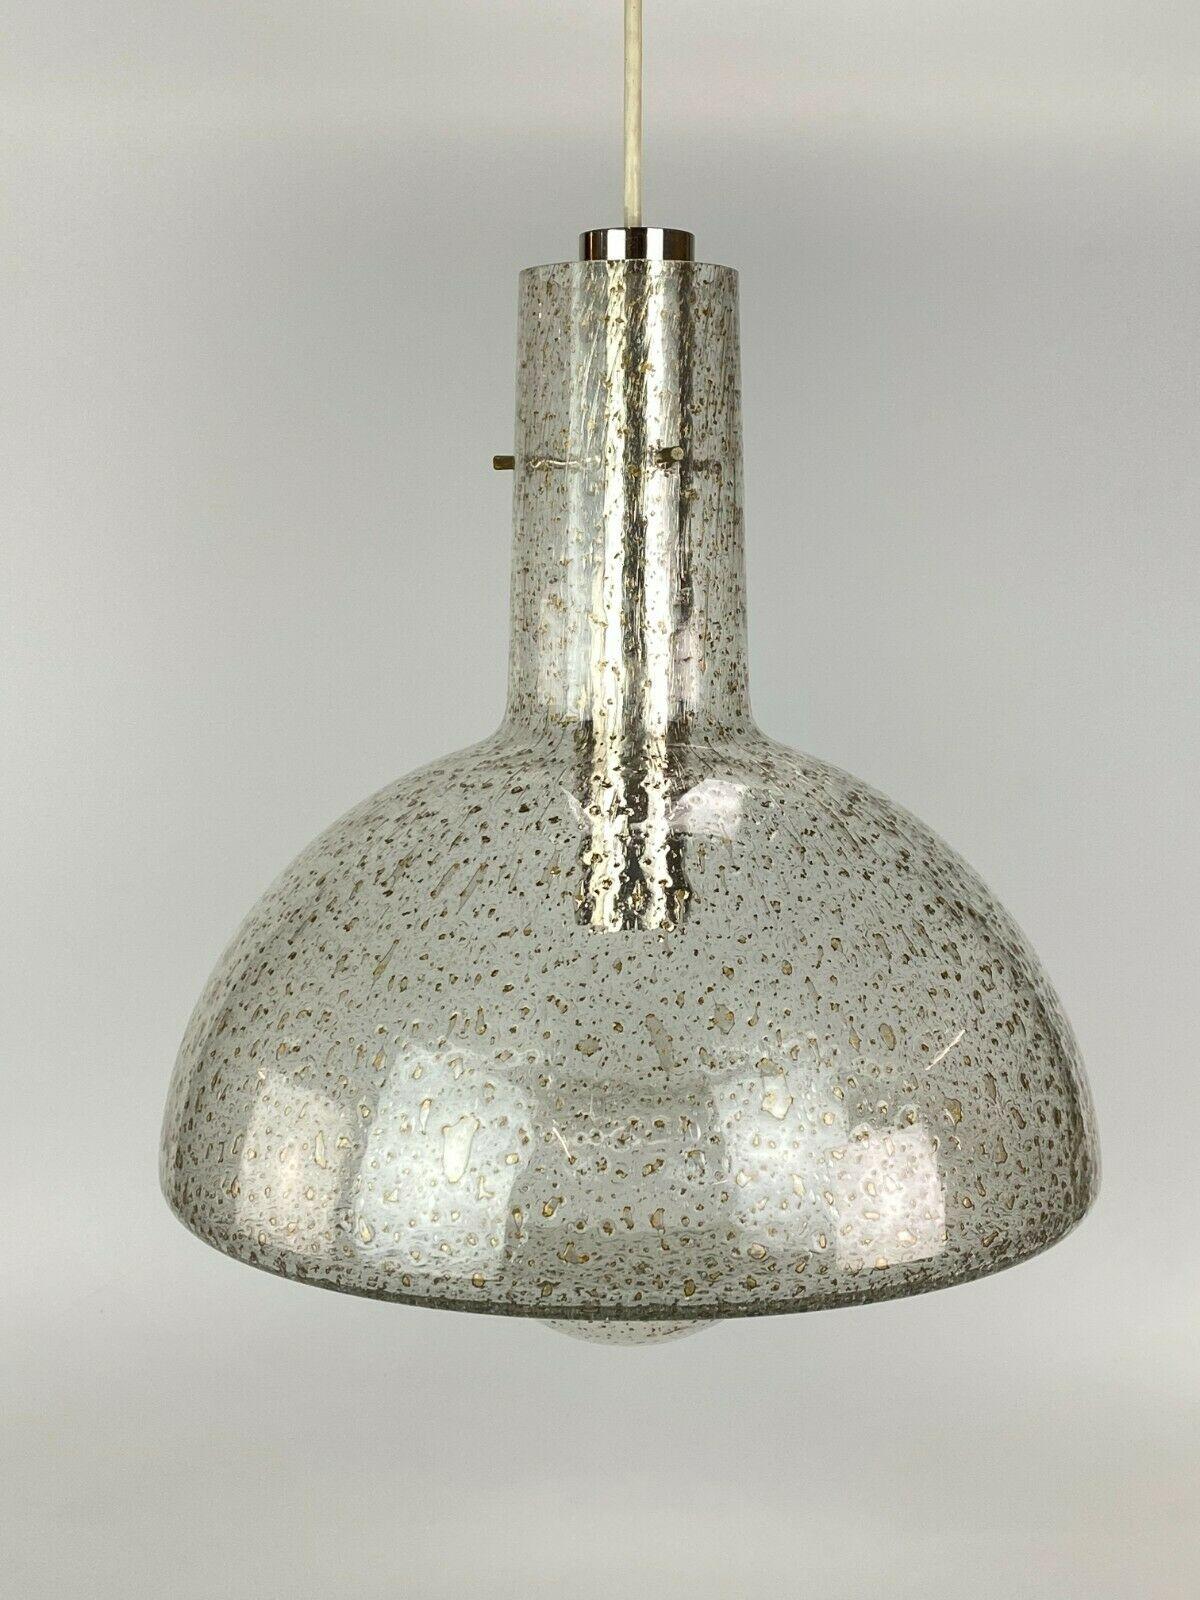 60s 70s Lamp light ceiling lamp hanging lamp Temde glass space age design.

Object: ceiling lamp

Manufacturer: Temde

Condition: good

Age: around 1960-1970

Dimensions:

Diameter = 34cm
Height = 38cm

Other notes:

The pictures